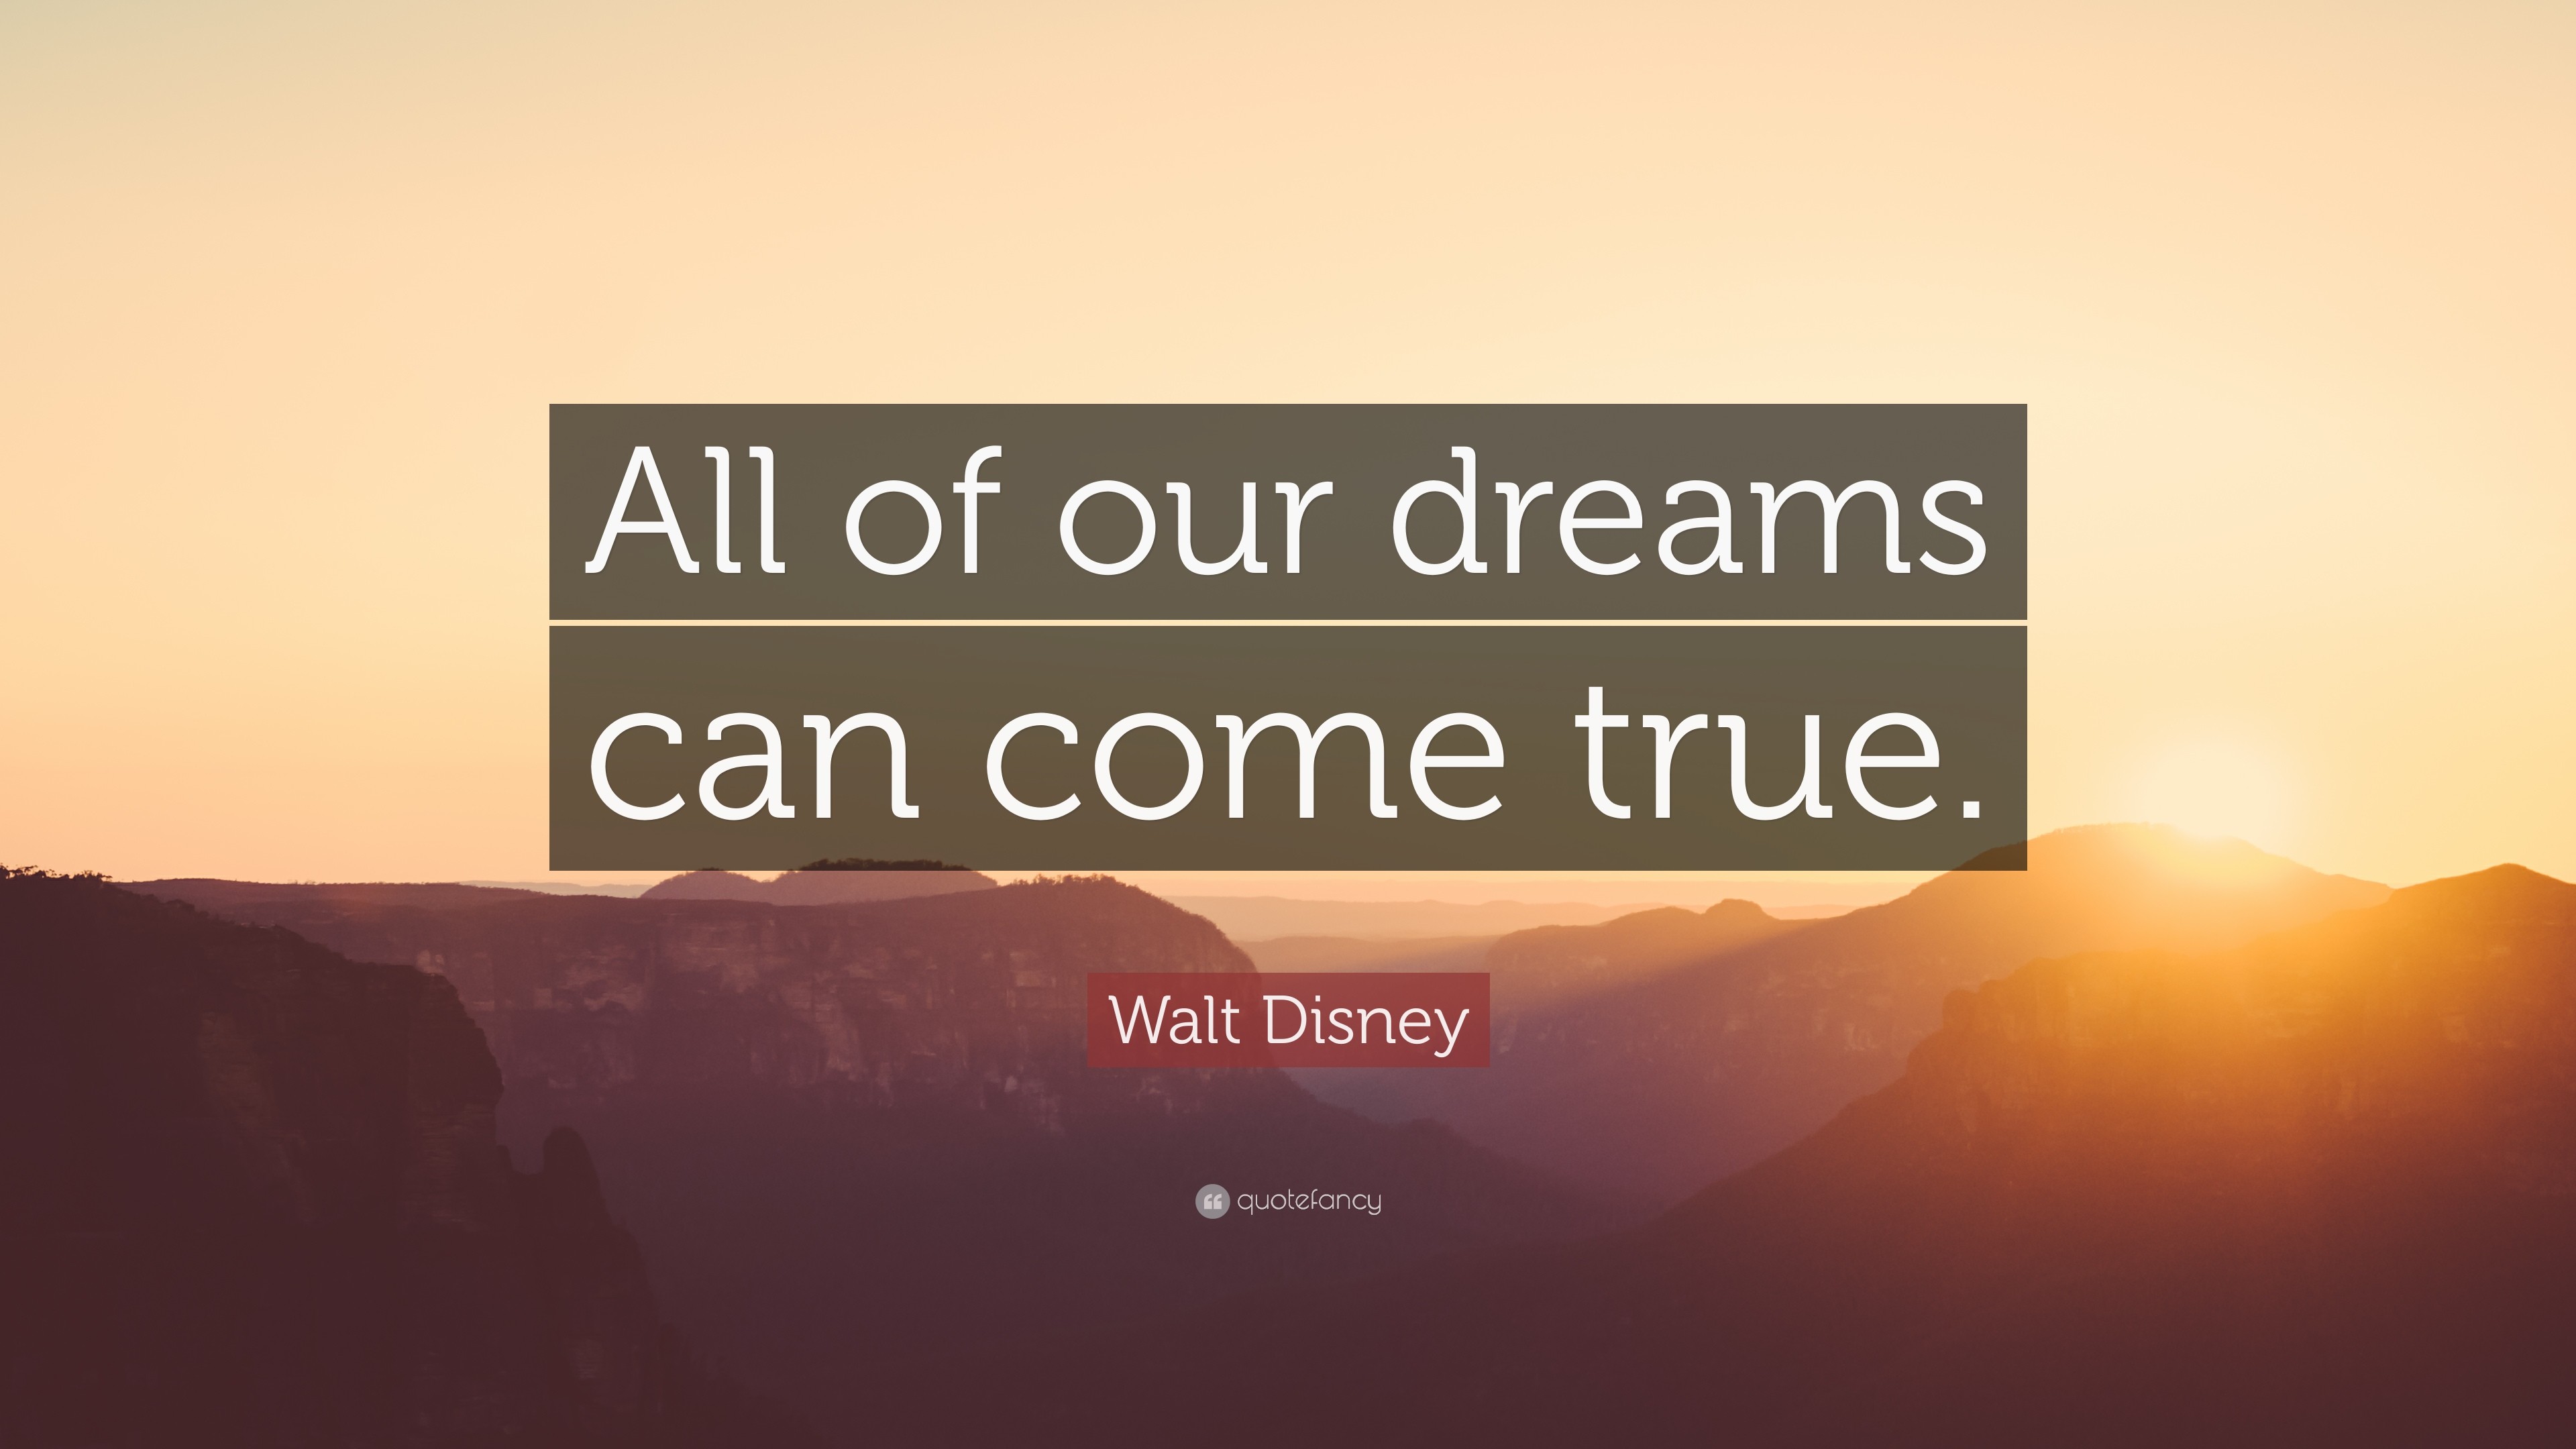 3840x2160 ... wallpapers hd; walt disney quote all of our dreams can come true 21 ...